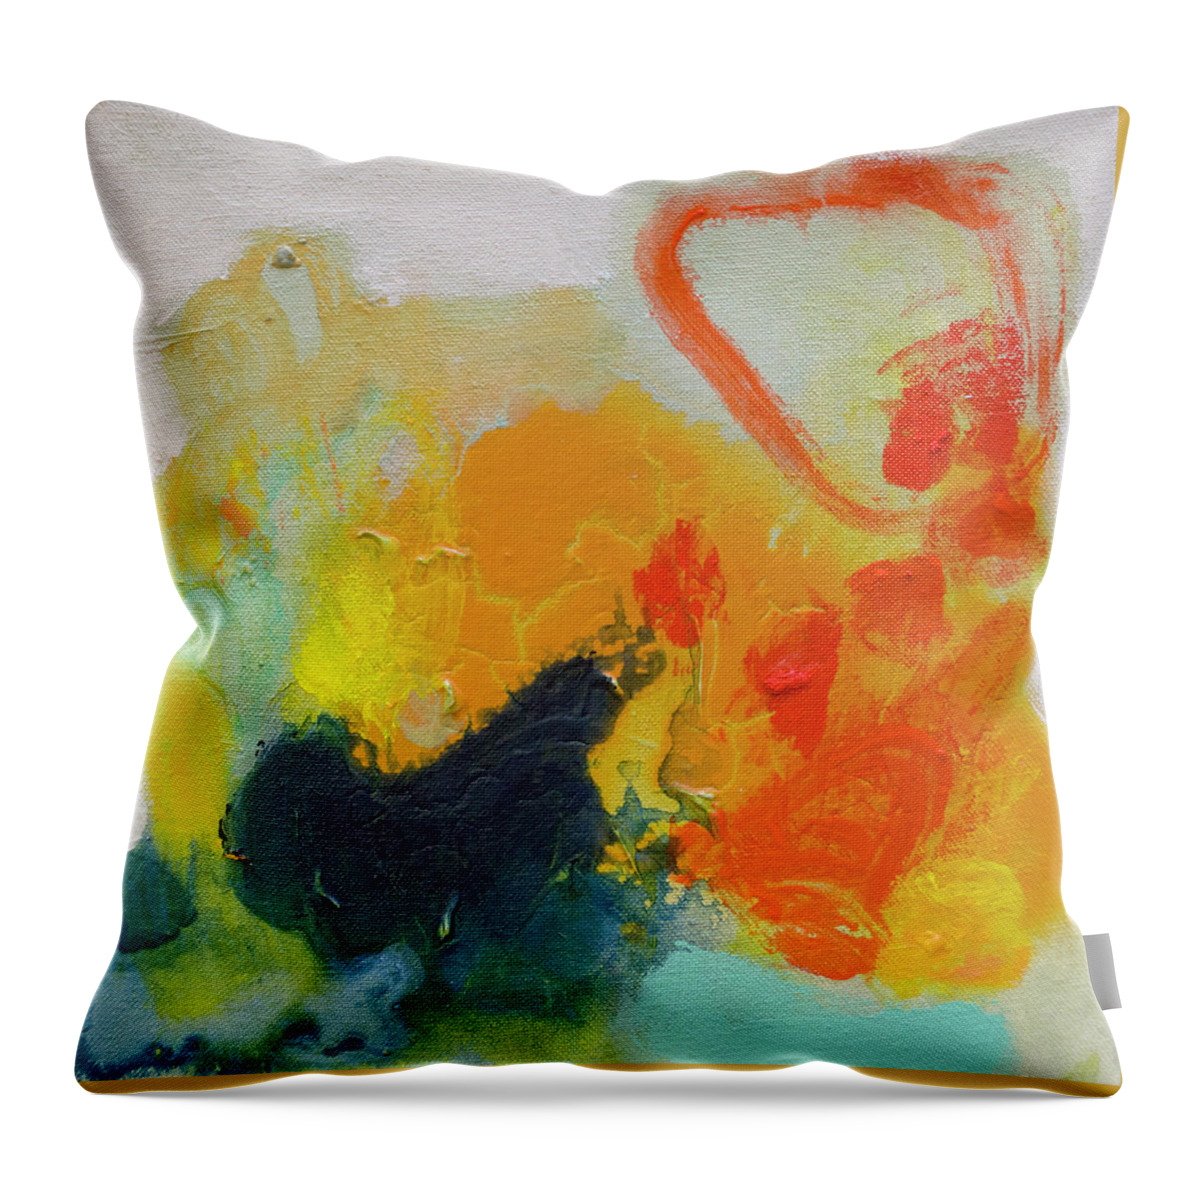 Abstract Throw Pillow featuring the painting Mini 05 by Claire Desjardins